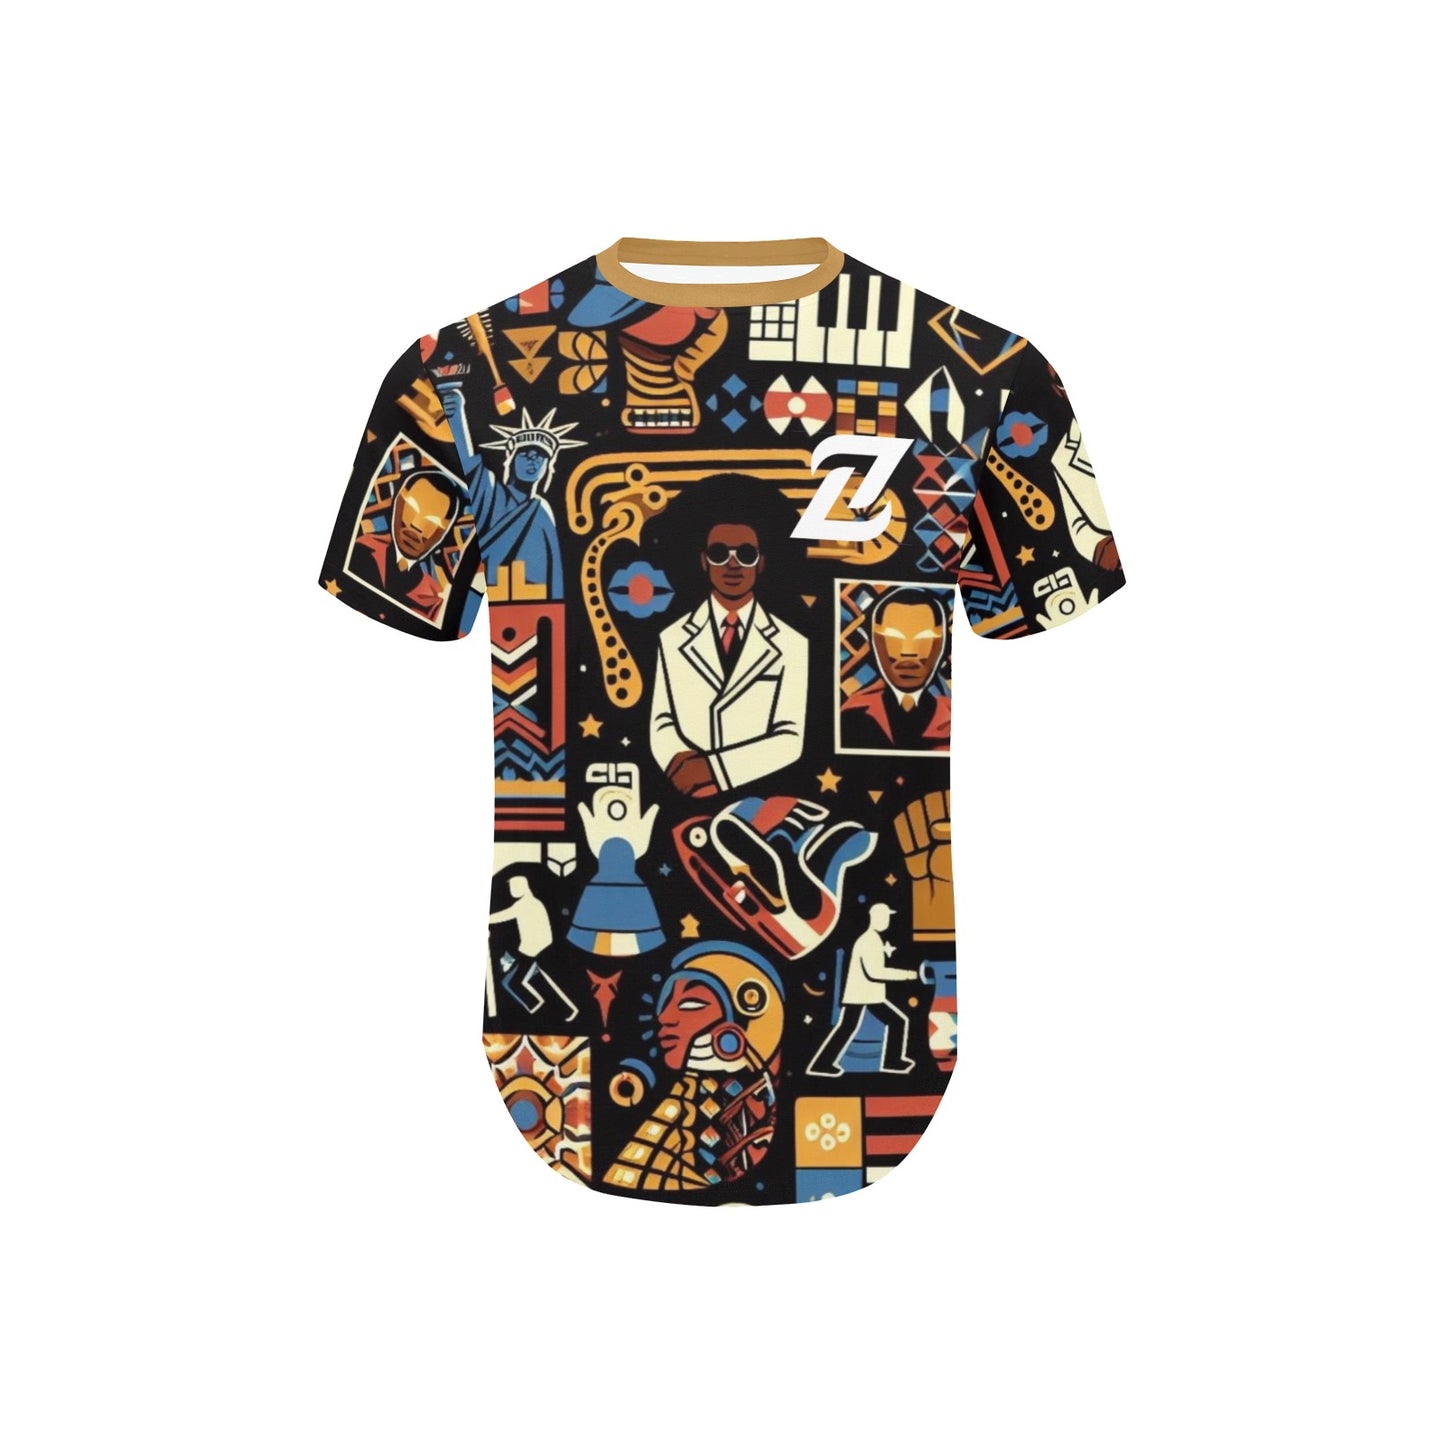 Zen Shirts - Black History Collection